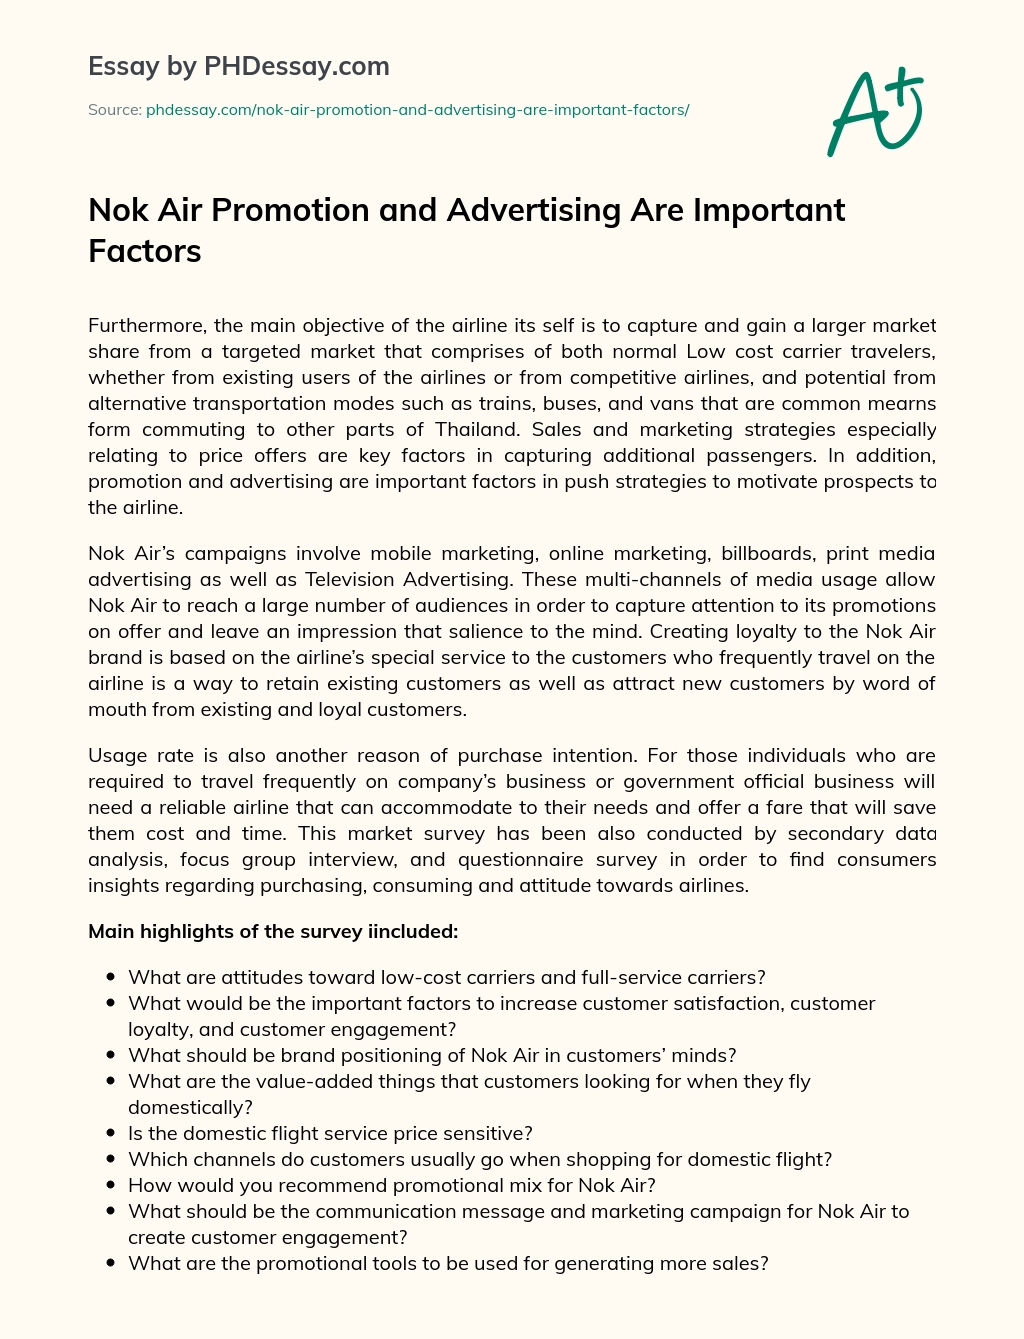 Nok Air Promotion and Advertising Are Important Factors essay